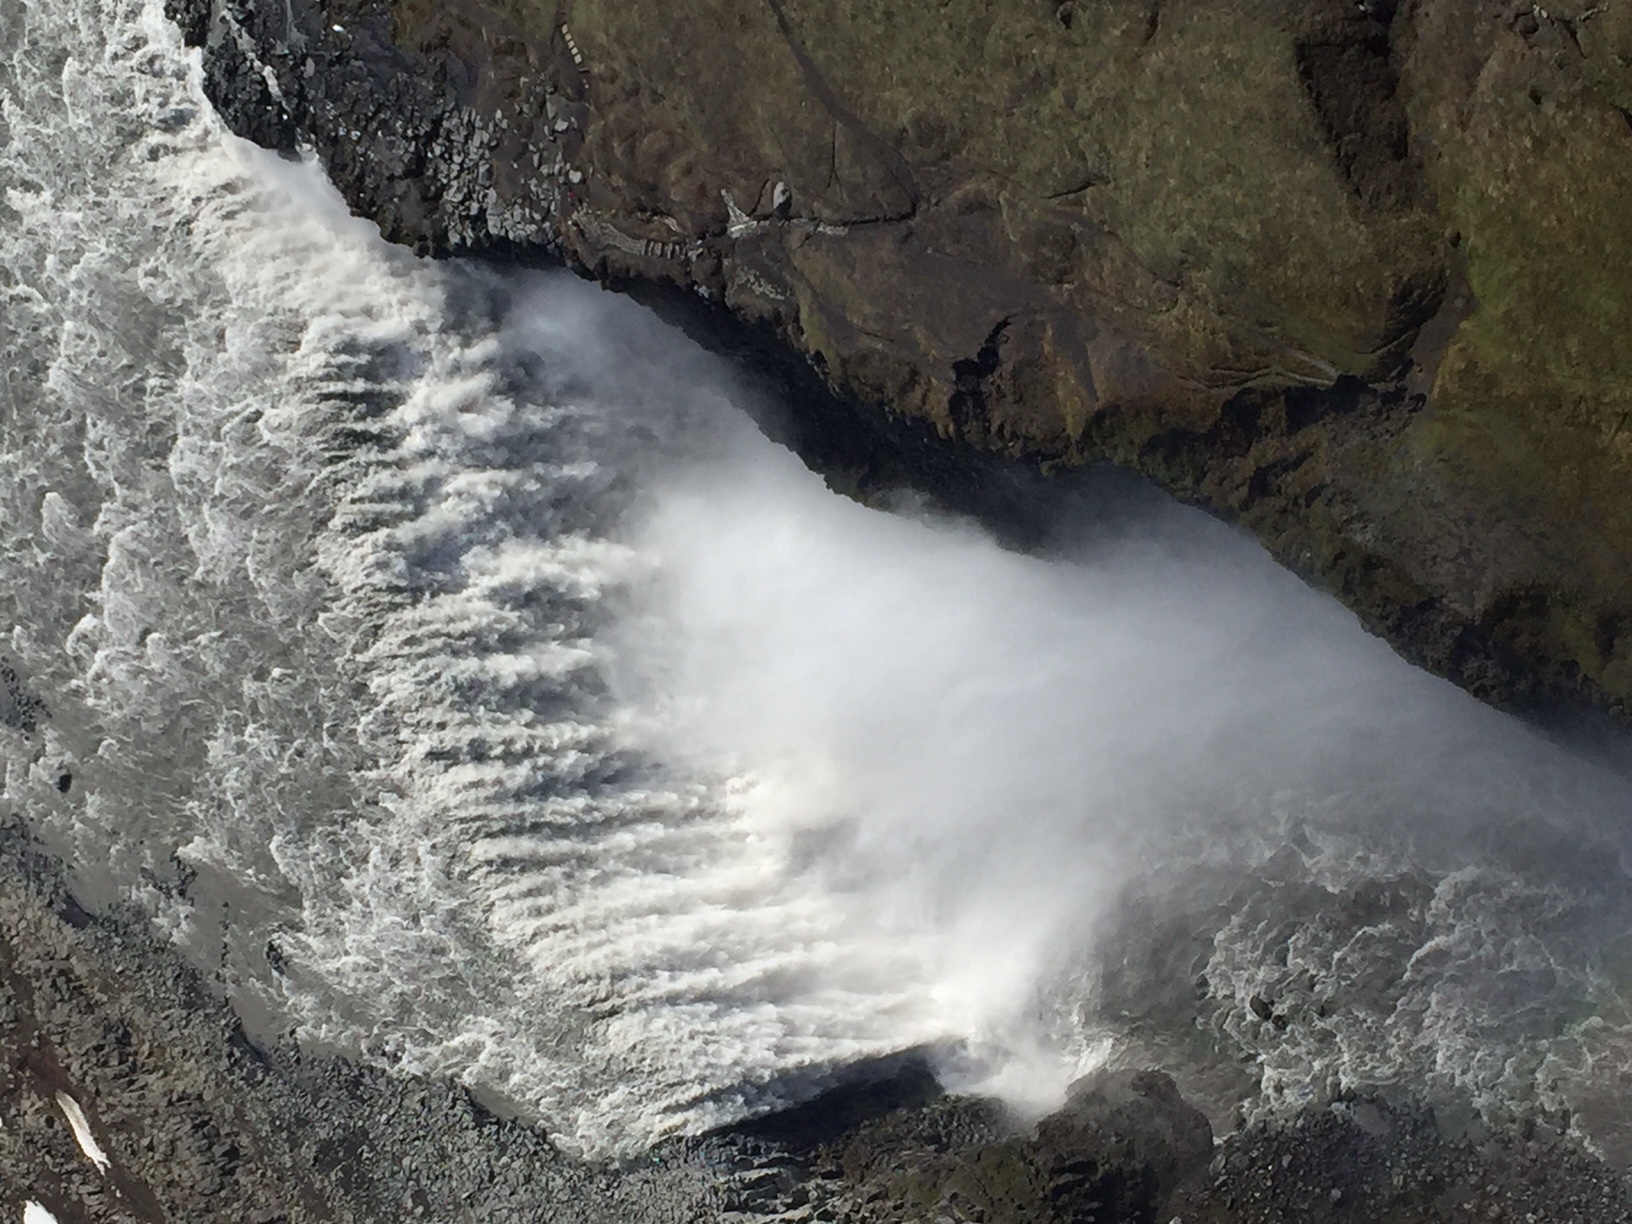 The largest waterfall in Europe, Dettifoss in North Iceland, as pictured from a plane.